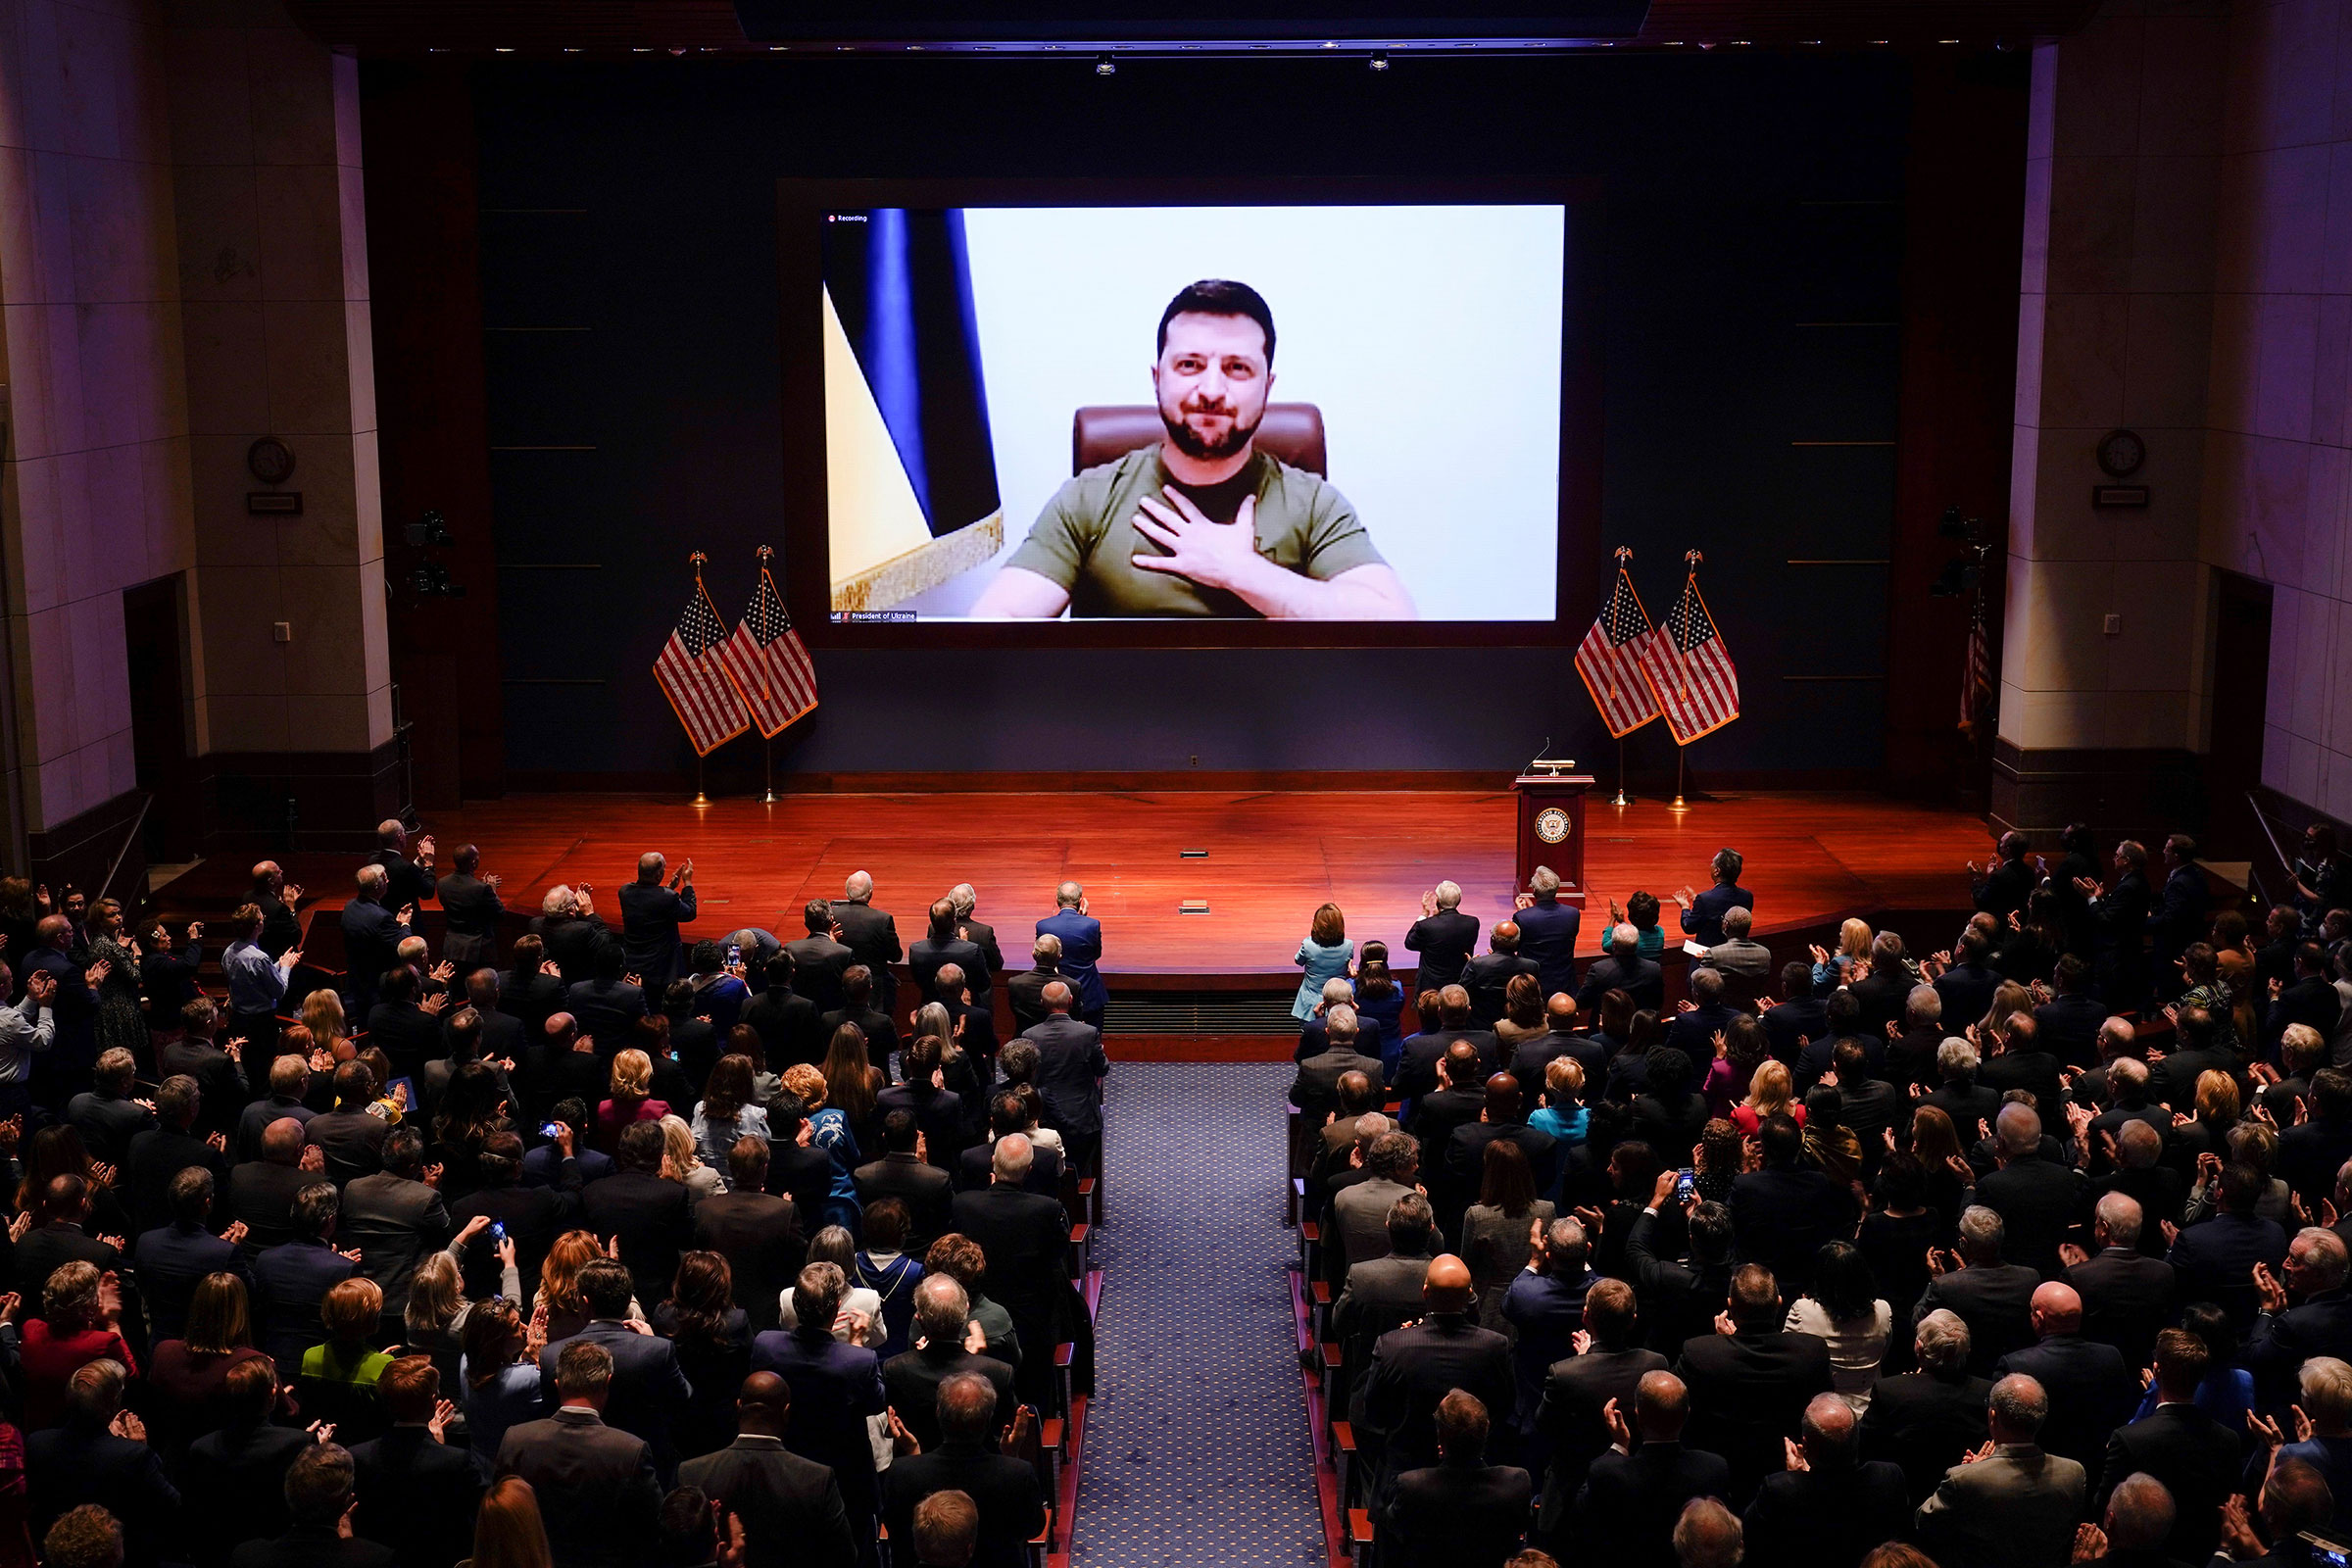 Ukrainian President Volodymyr Zelensky is seen on the screen delivering a speech via videoconference to the U.S. Congress at the Capitol in Washington,  on March 16, 2022. (J. Scott Applewhite—Pool/Xinhua/Getty Images)